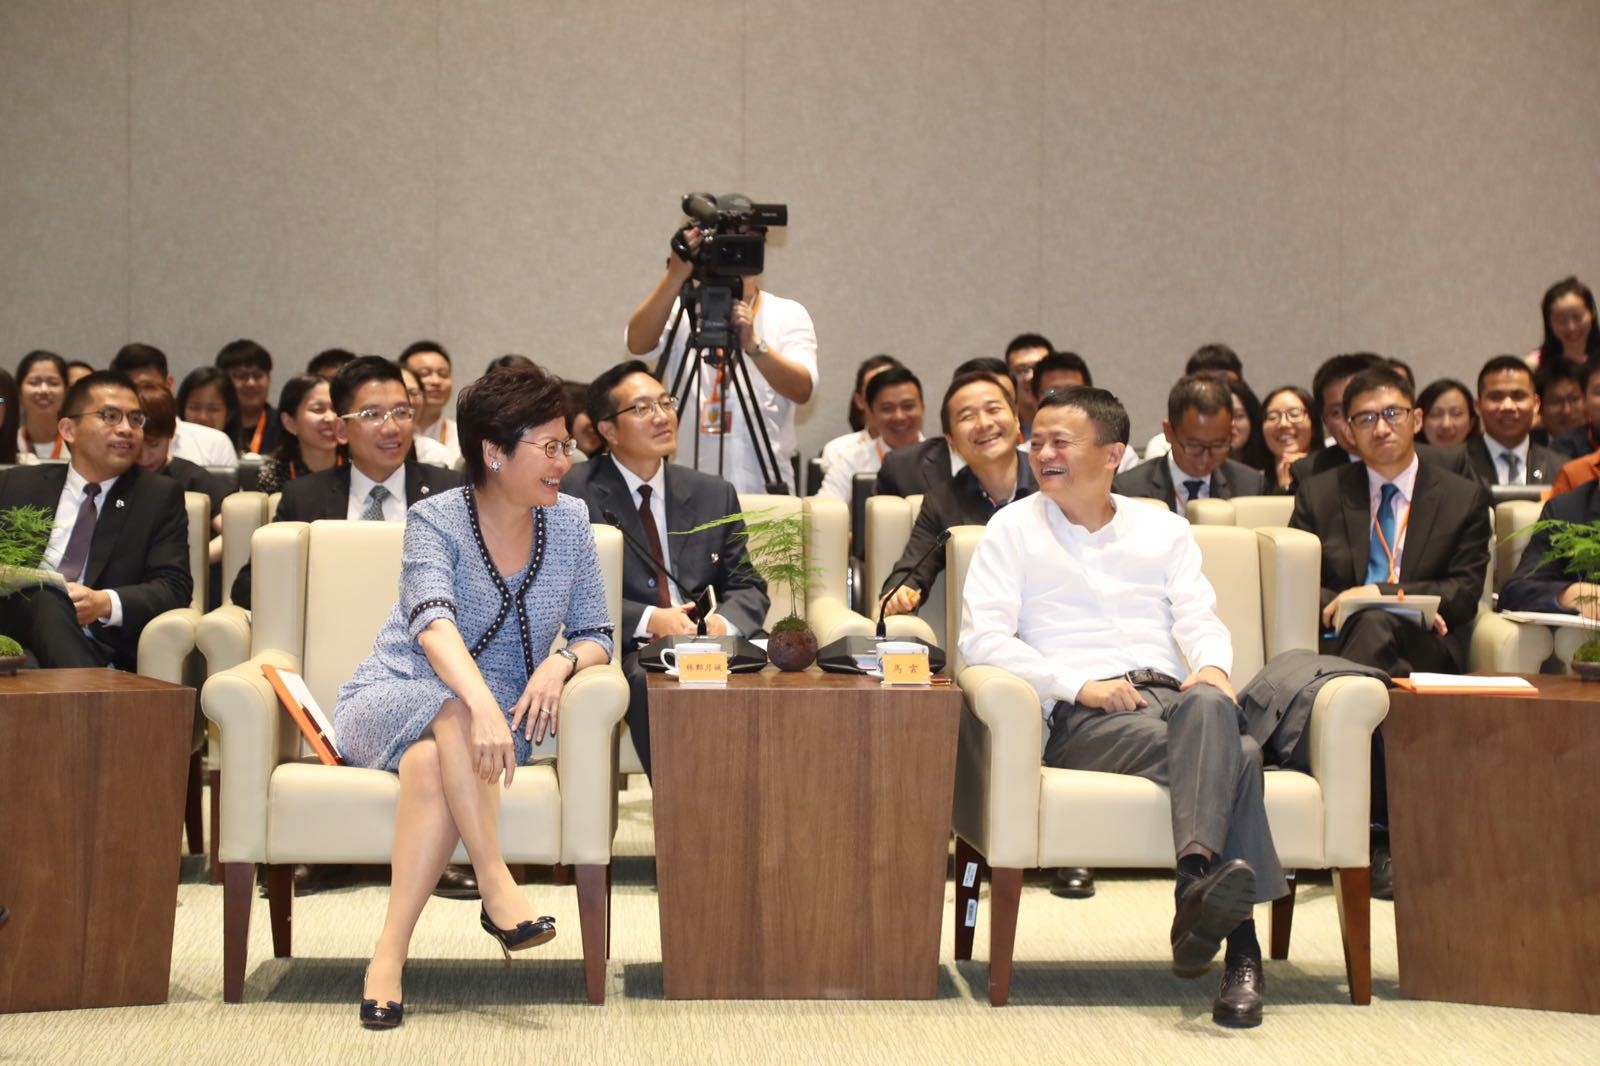 Hong Kong Chief Executive Carrie Lam meets Jack Ma at Alibaba’s headquarters in Hangzhou. Photo: Handout